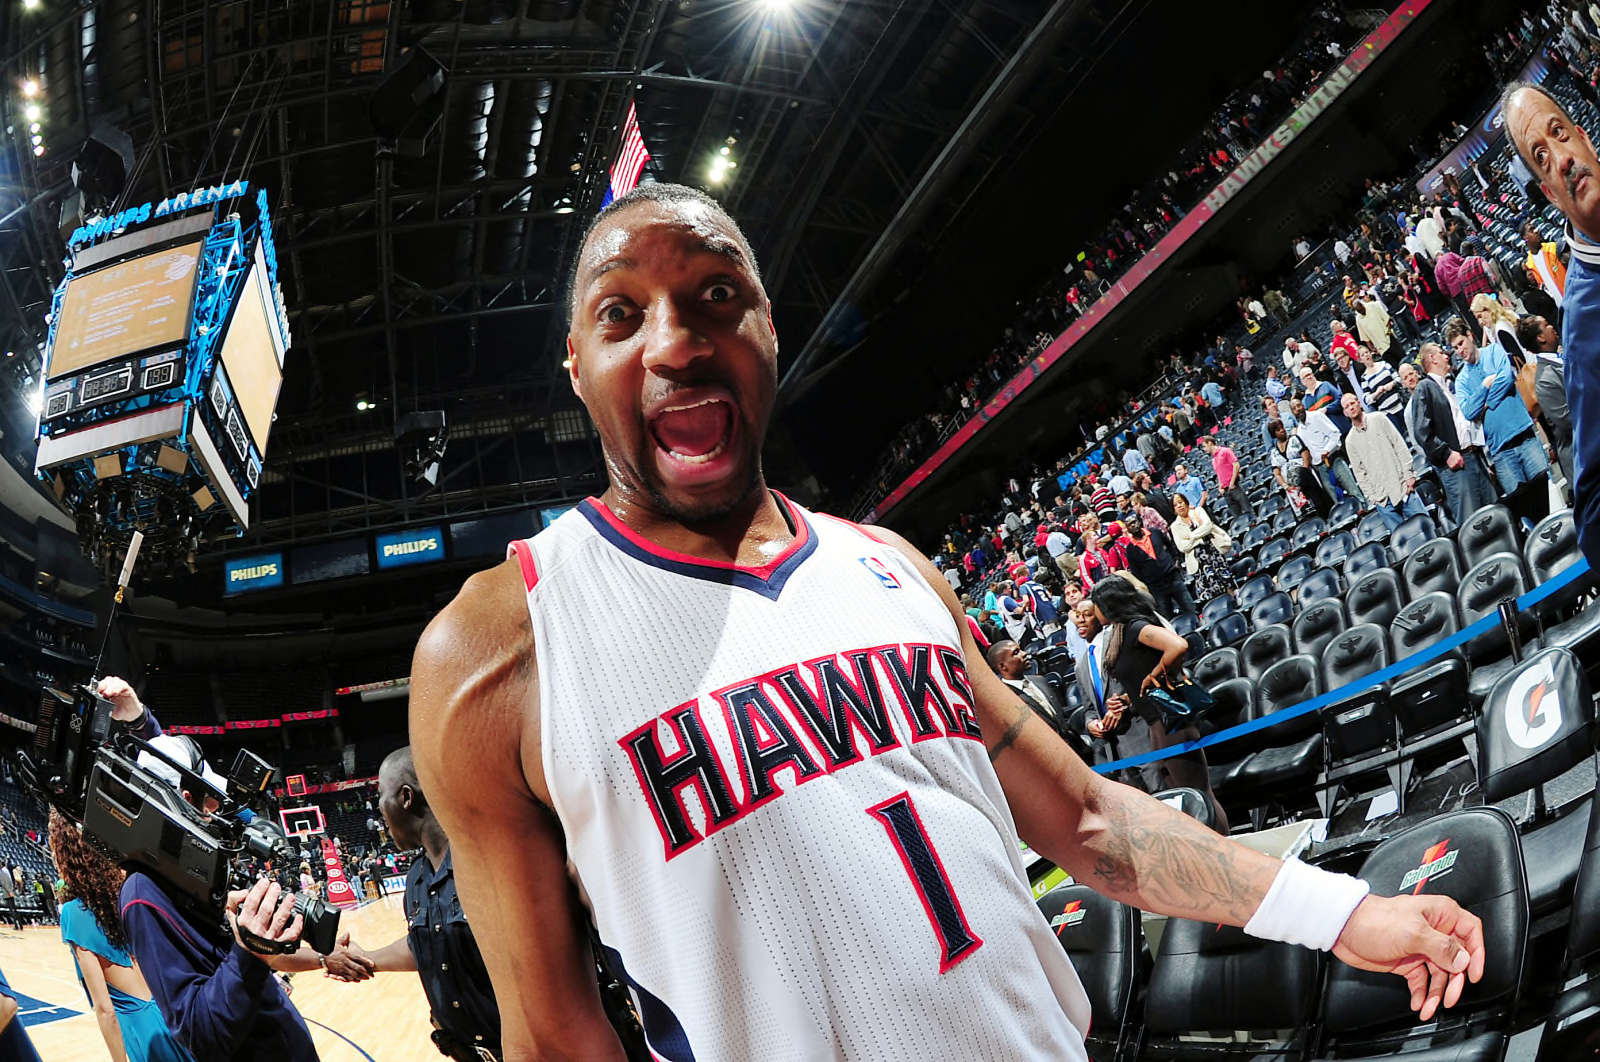 Players You Forgot Were on the Atlanta Hawks This Decade